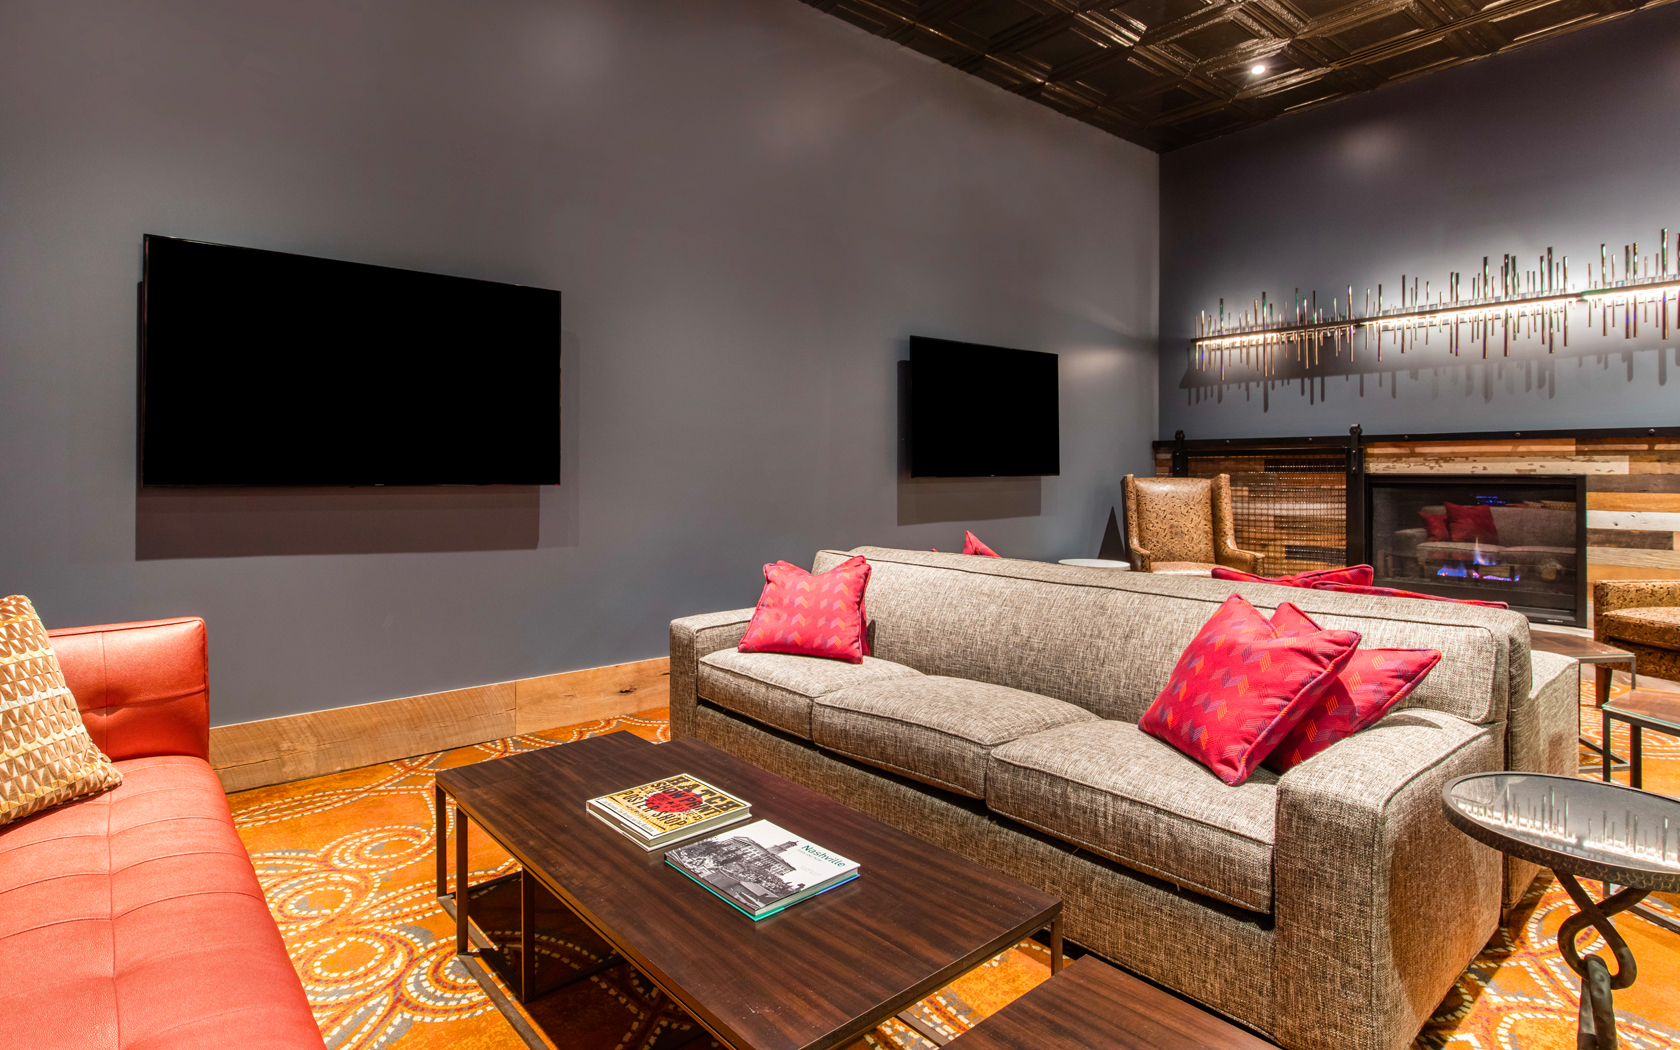 gallery View of a stylish living room with two tvs on the wall, wooden tables and a comfy sofas 